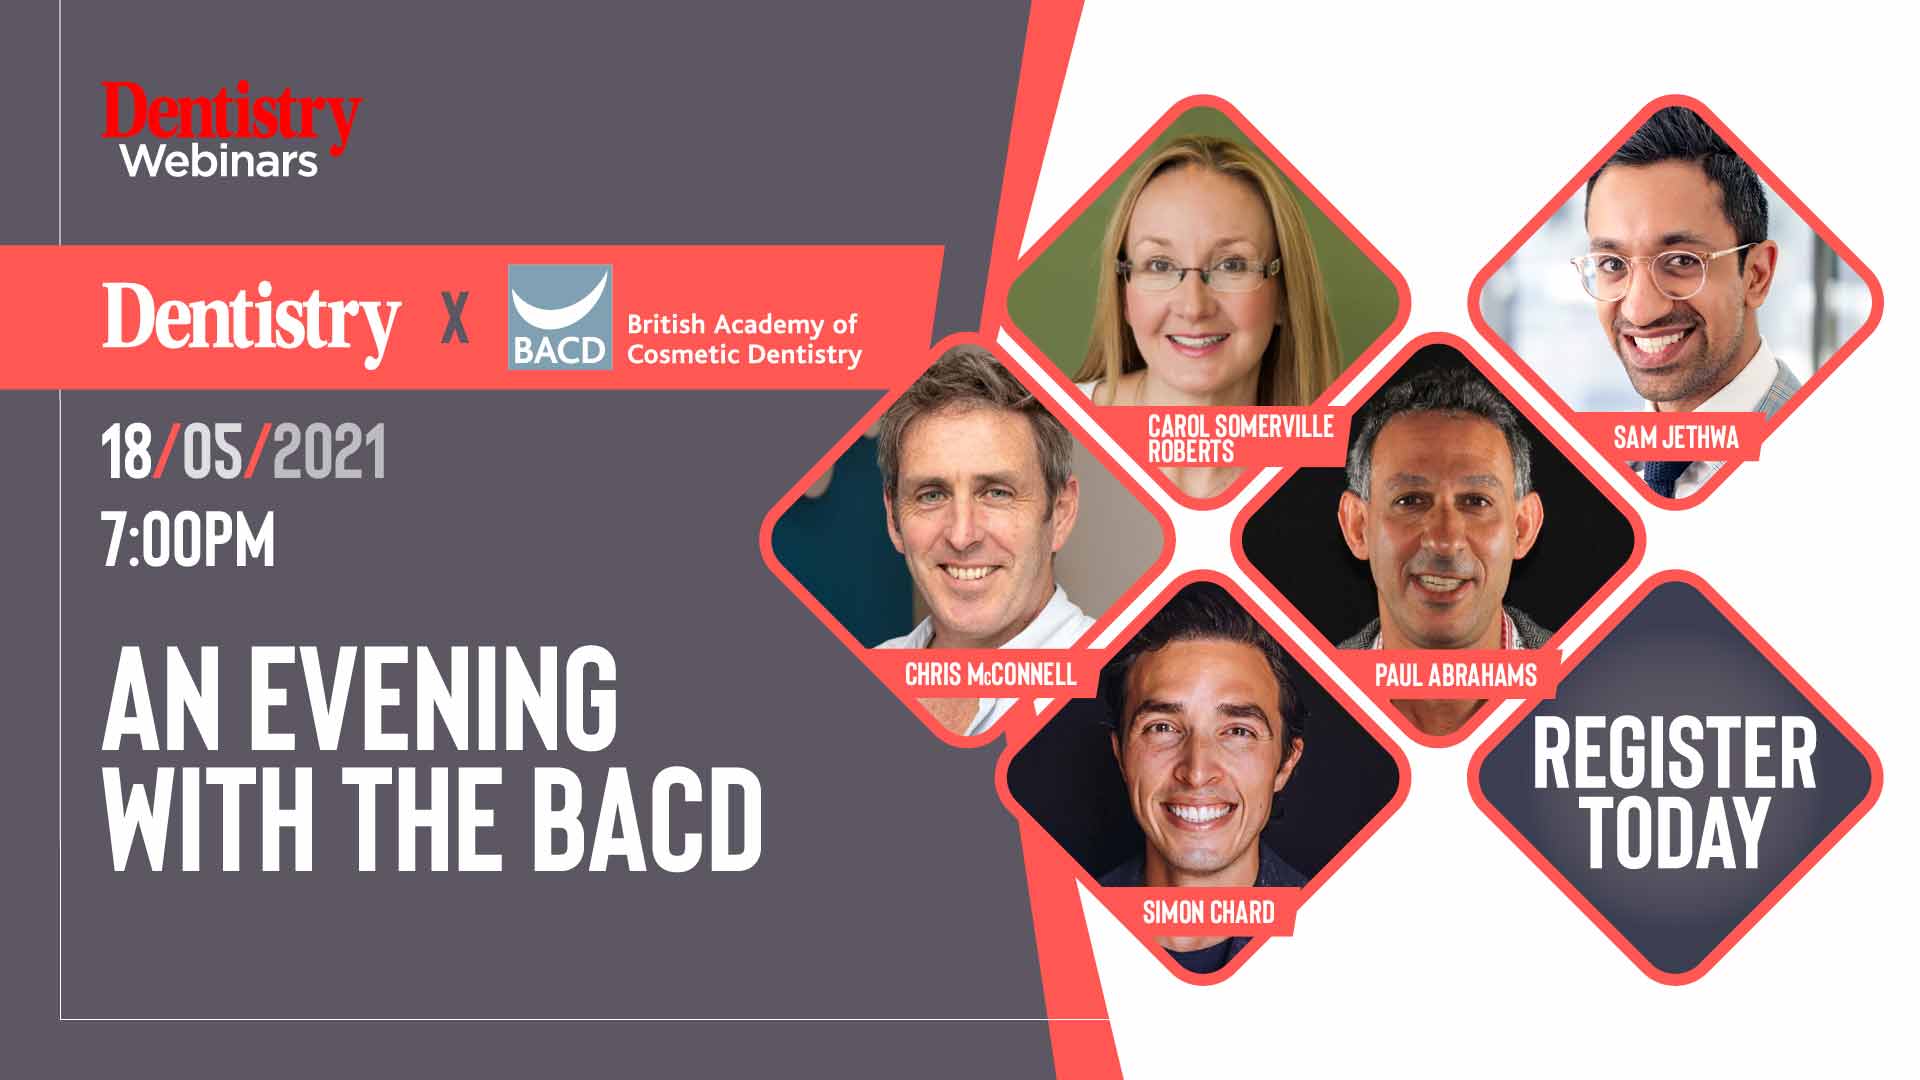 The British Academy of Cosmetic Dentistry (BACD) is pleased to deliver a series of talks from key dental experts